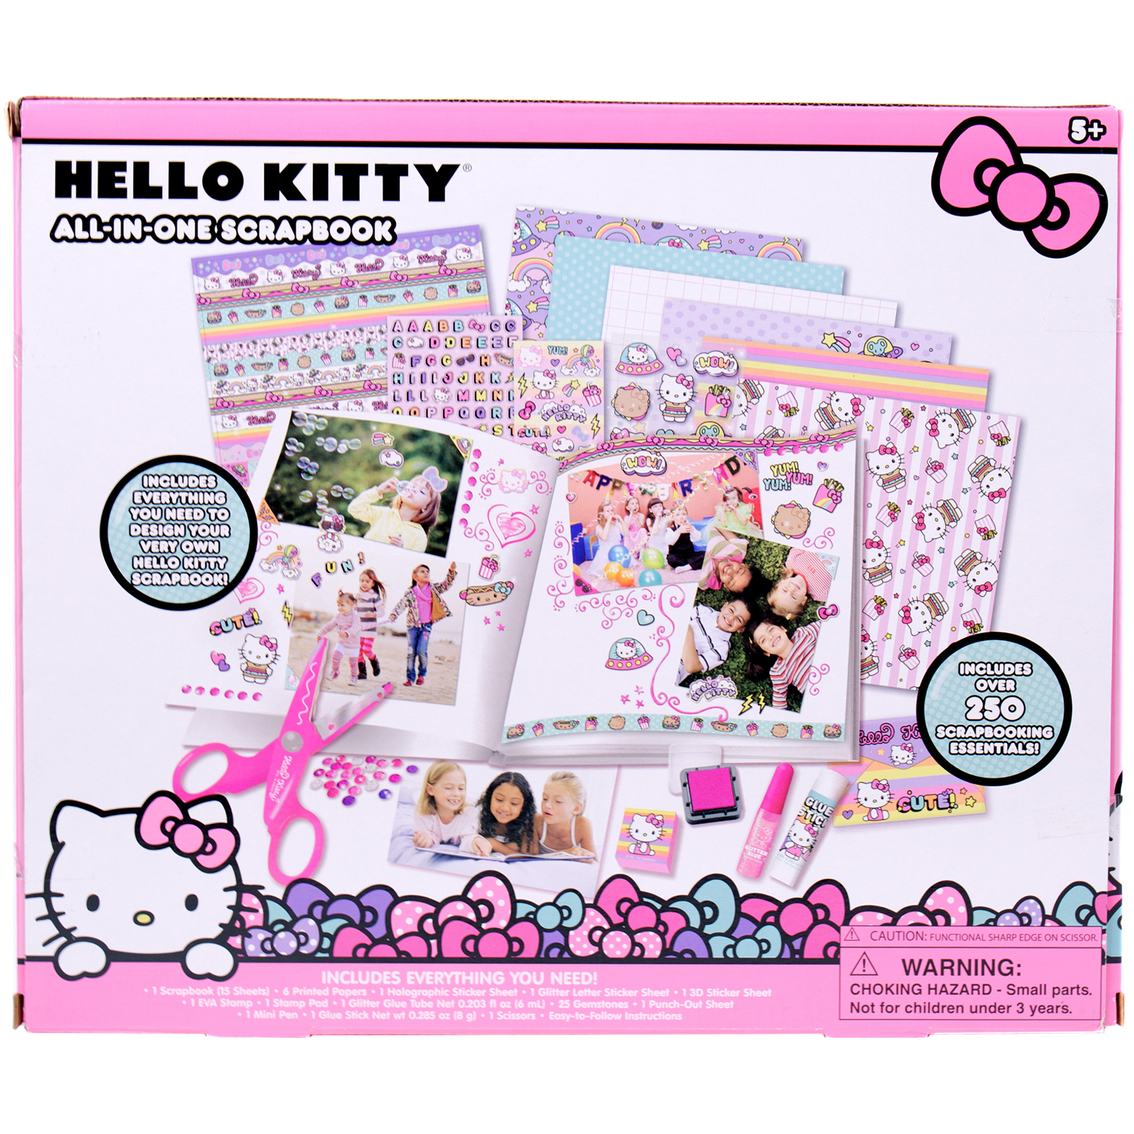 Hello Kitty Pack Of 2 Heart Stamps 54095 By Horizon Group USA New!!! 